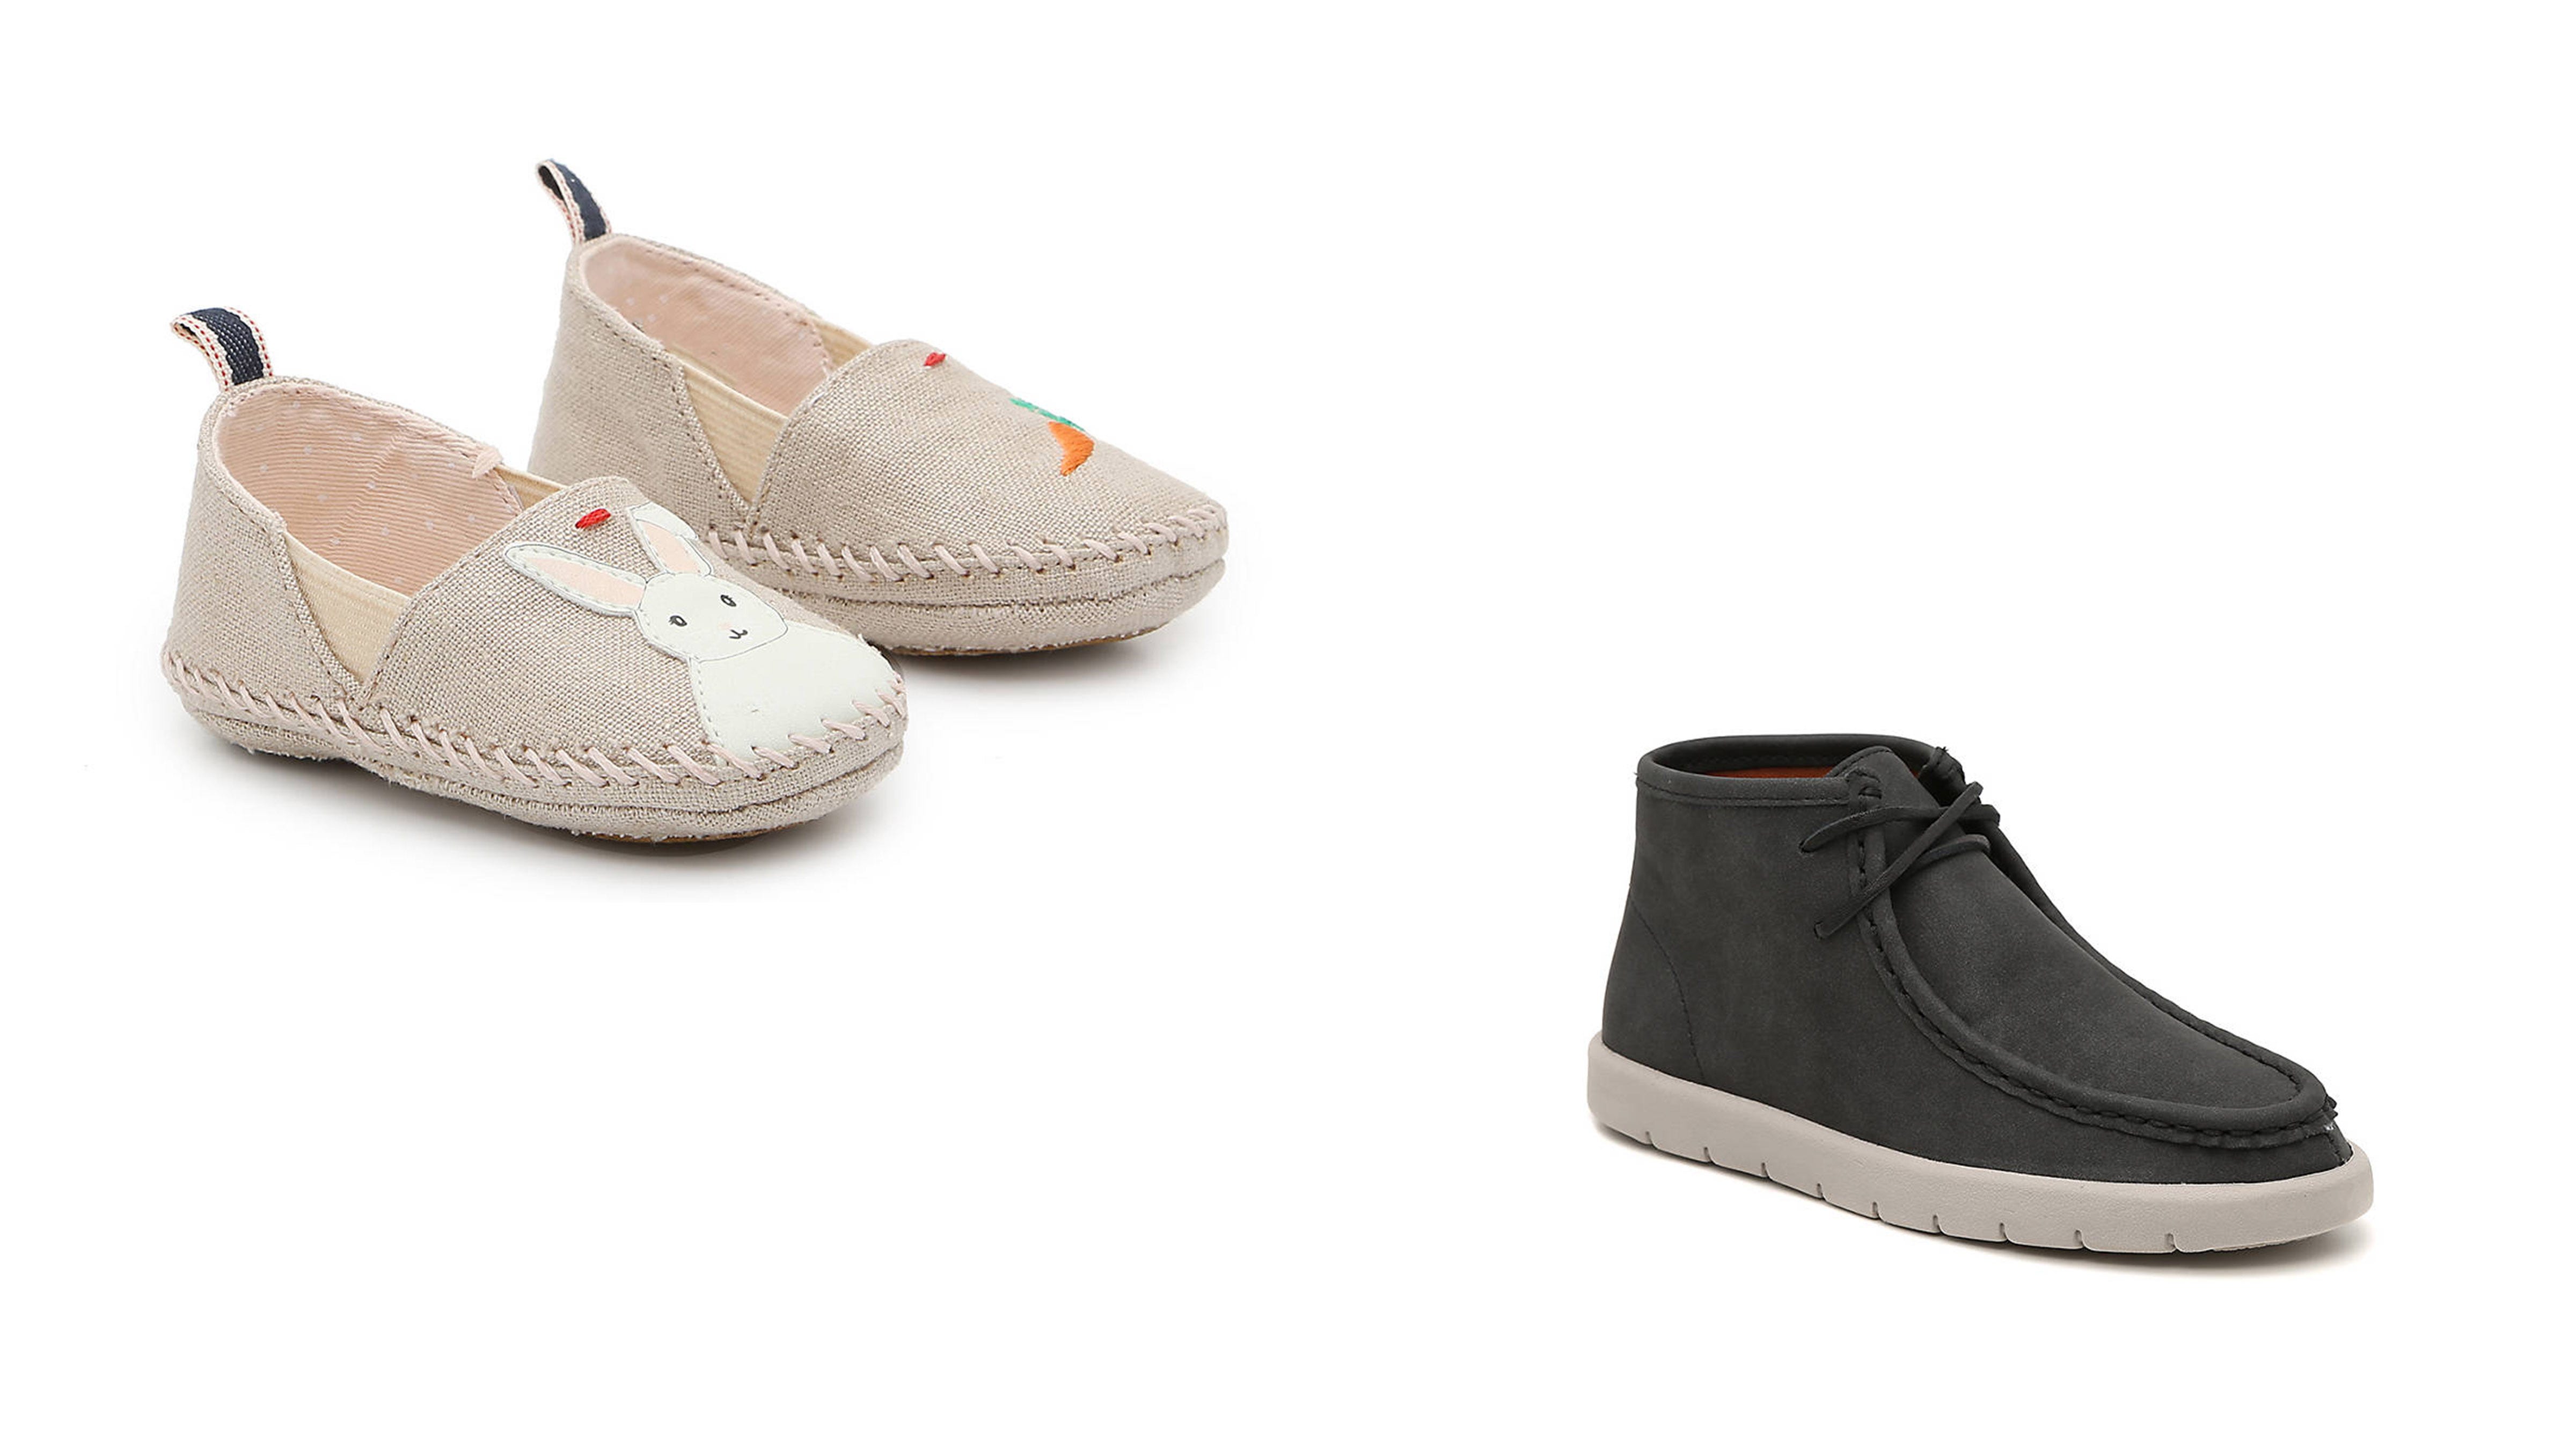 Kids' shoes on sale: Get deals on top 